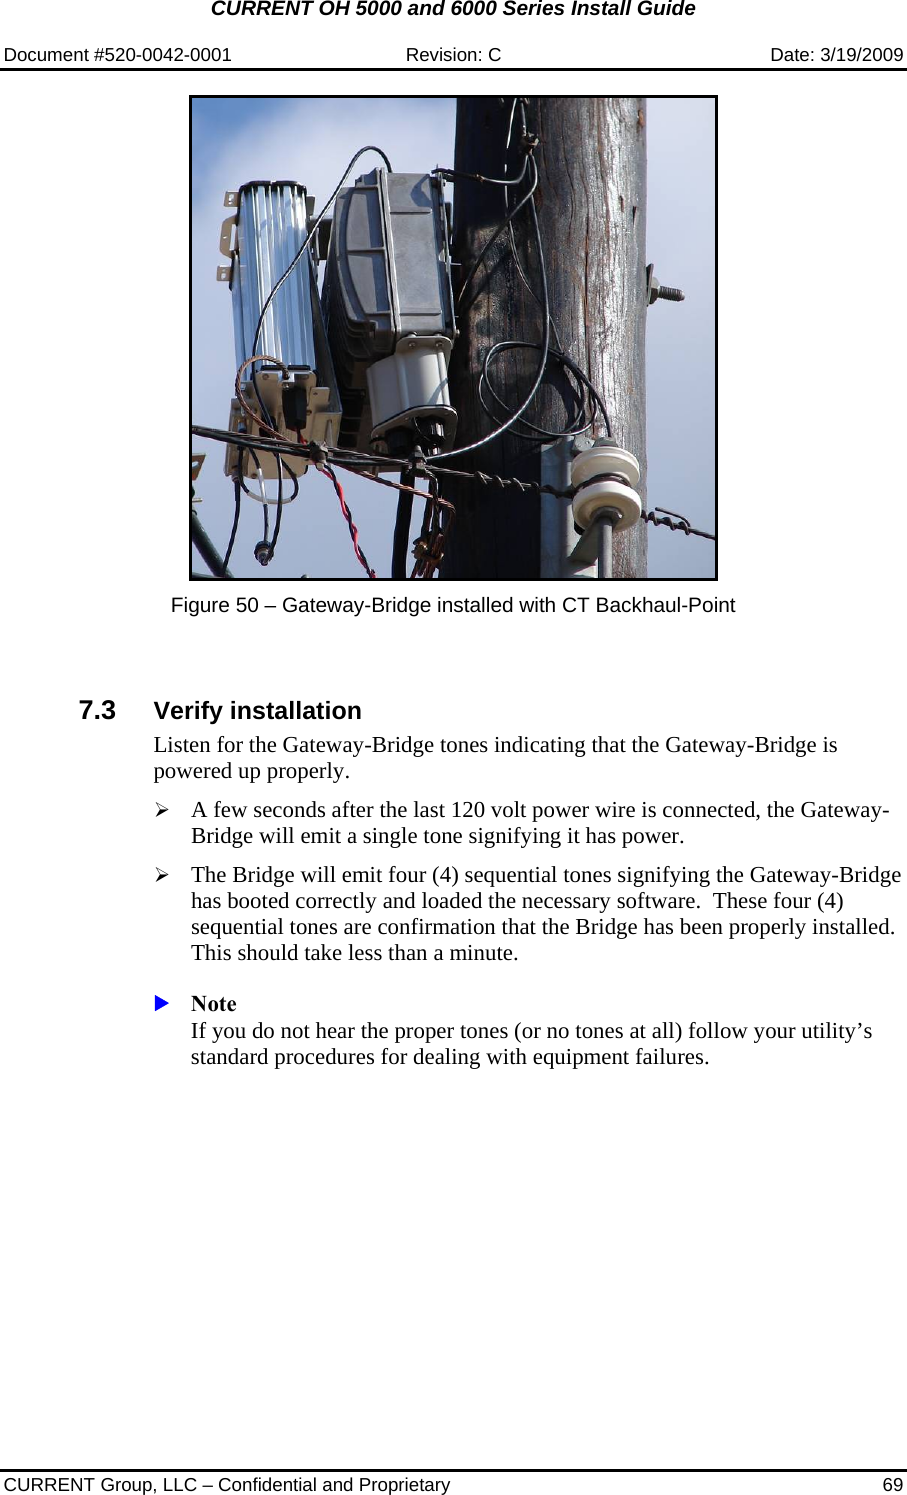 CURRENT OH 5000 and 6000 Series Install Guide  Document #520-0042-0001  Revision: C  Date: 3/19/2009  CURRENT Group, LLC – Confidential and Proprietary  69   Figure 50 – Gateway-Bridge installed with CT Backhaul-Point   7.3  Verify installation Listen for the Gateway-Bridge tones indicating that the Gateway-Bridge is powered up properly.   ¾ A few seconds after the last 120 volt power wire is connected, the Gateway-Bridge will emit a single tone signifying it has power.  ¾ The Bridge will emit four (4) sequential tones signifying the Gateway-Bridge has booted correctly and loaded the necessary software.  These four (4) sequential tones are confirmation that the Bridge has been properly installed. This should take less than a minute.  X Note If you do not hear the proper tones (or no tones at all) follow your utility’s standard procedures for dealing with equipment failures.     